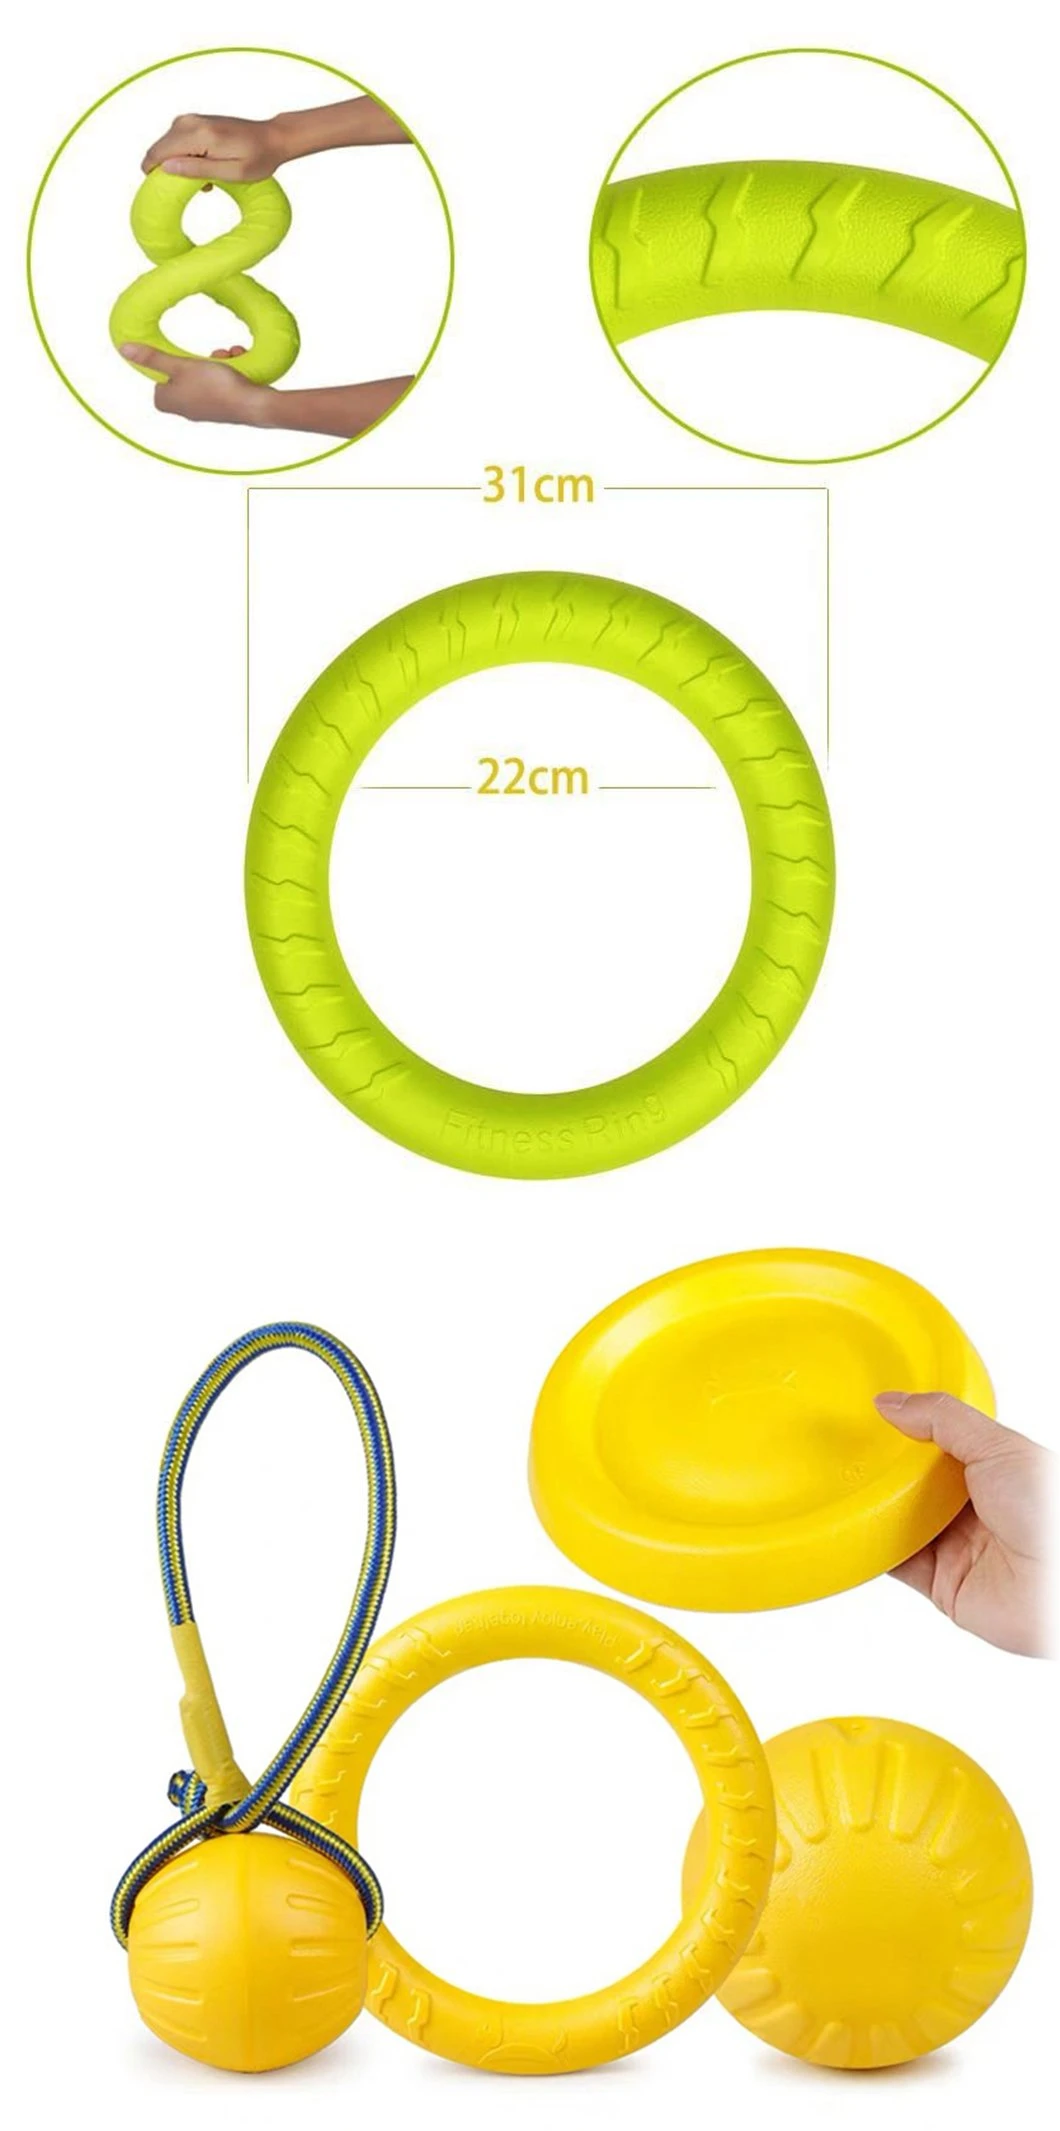 Outdoor Fitness Flying Discs Pet EVA Foam Toys Set Dogs Ball Dog Training Toy Chew Play Bite Toy